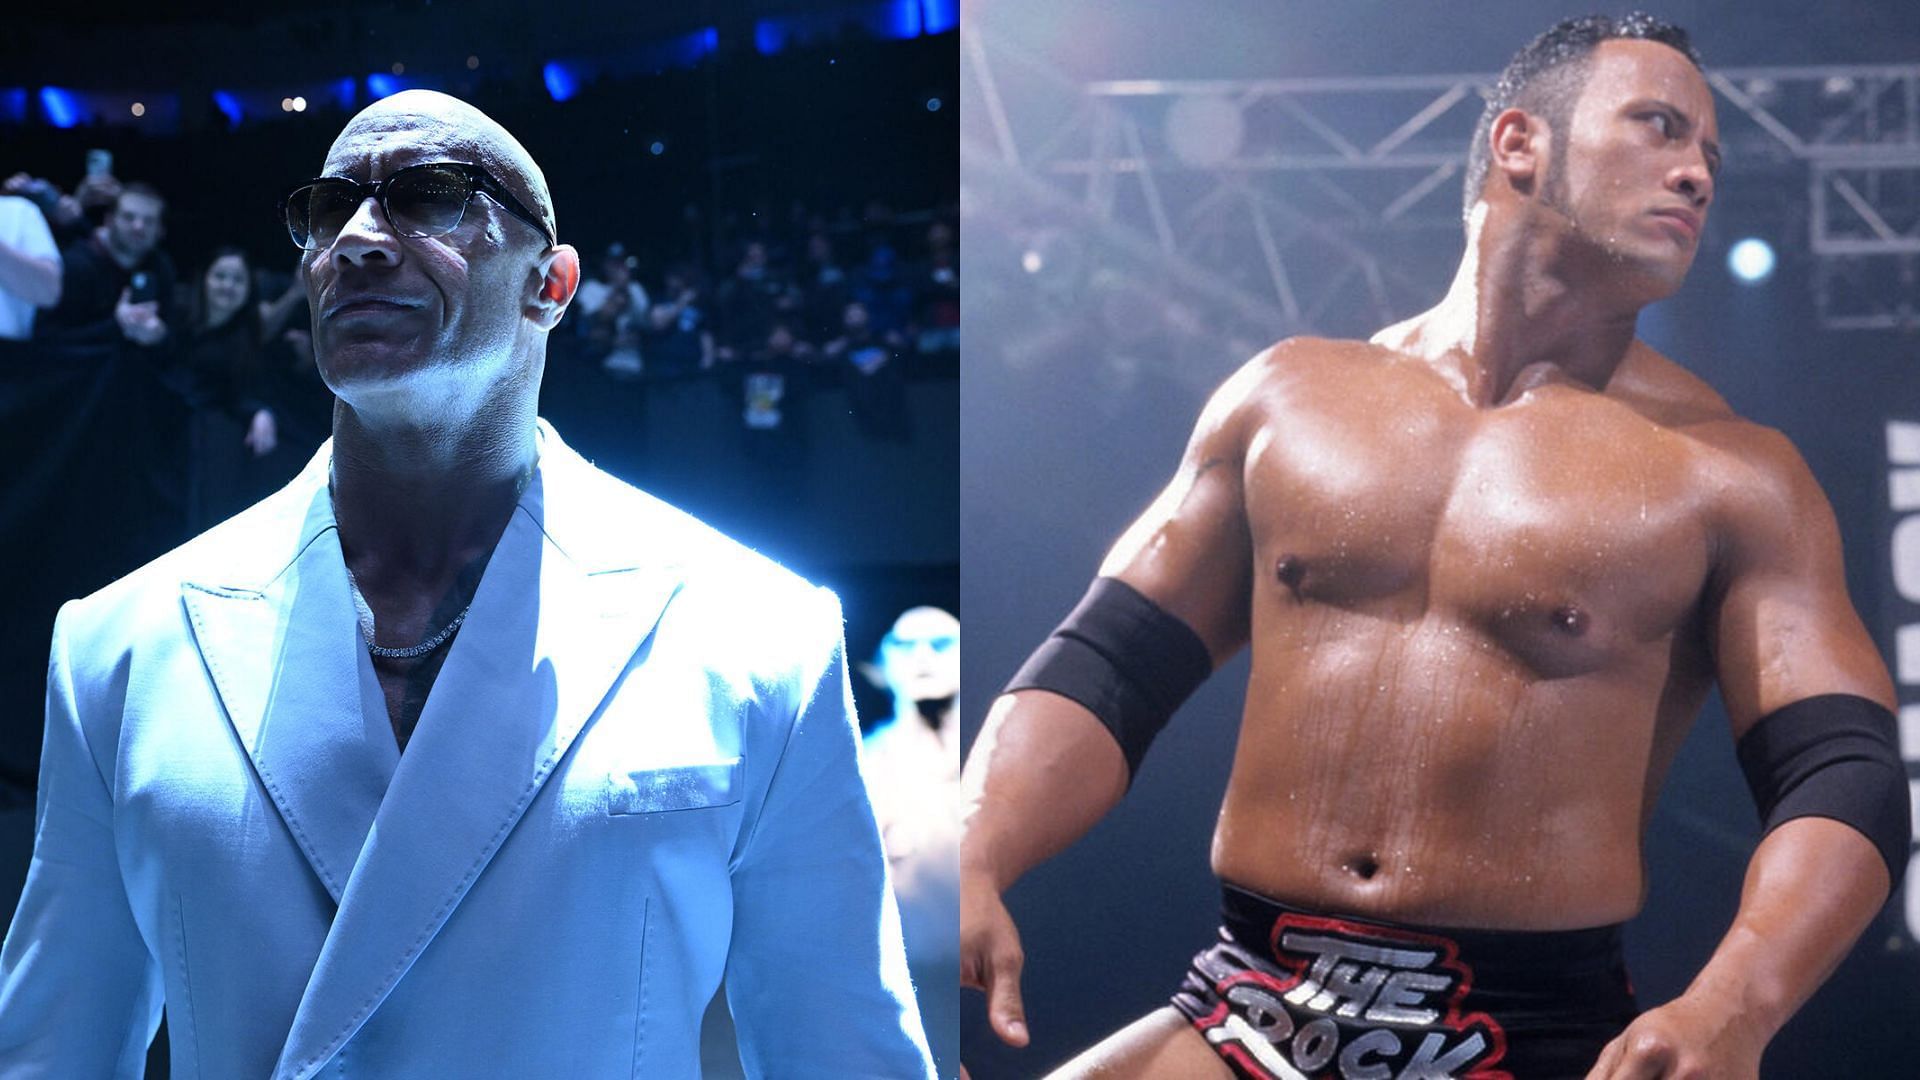 The Rock is one of the most famous WWE Superstars of all time